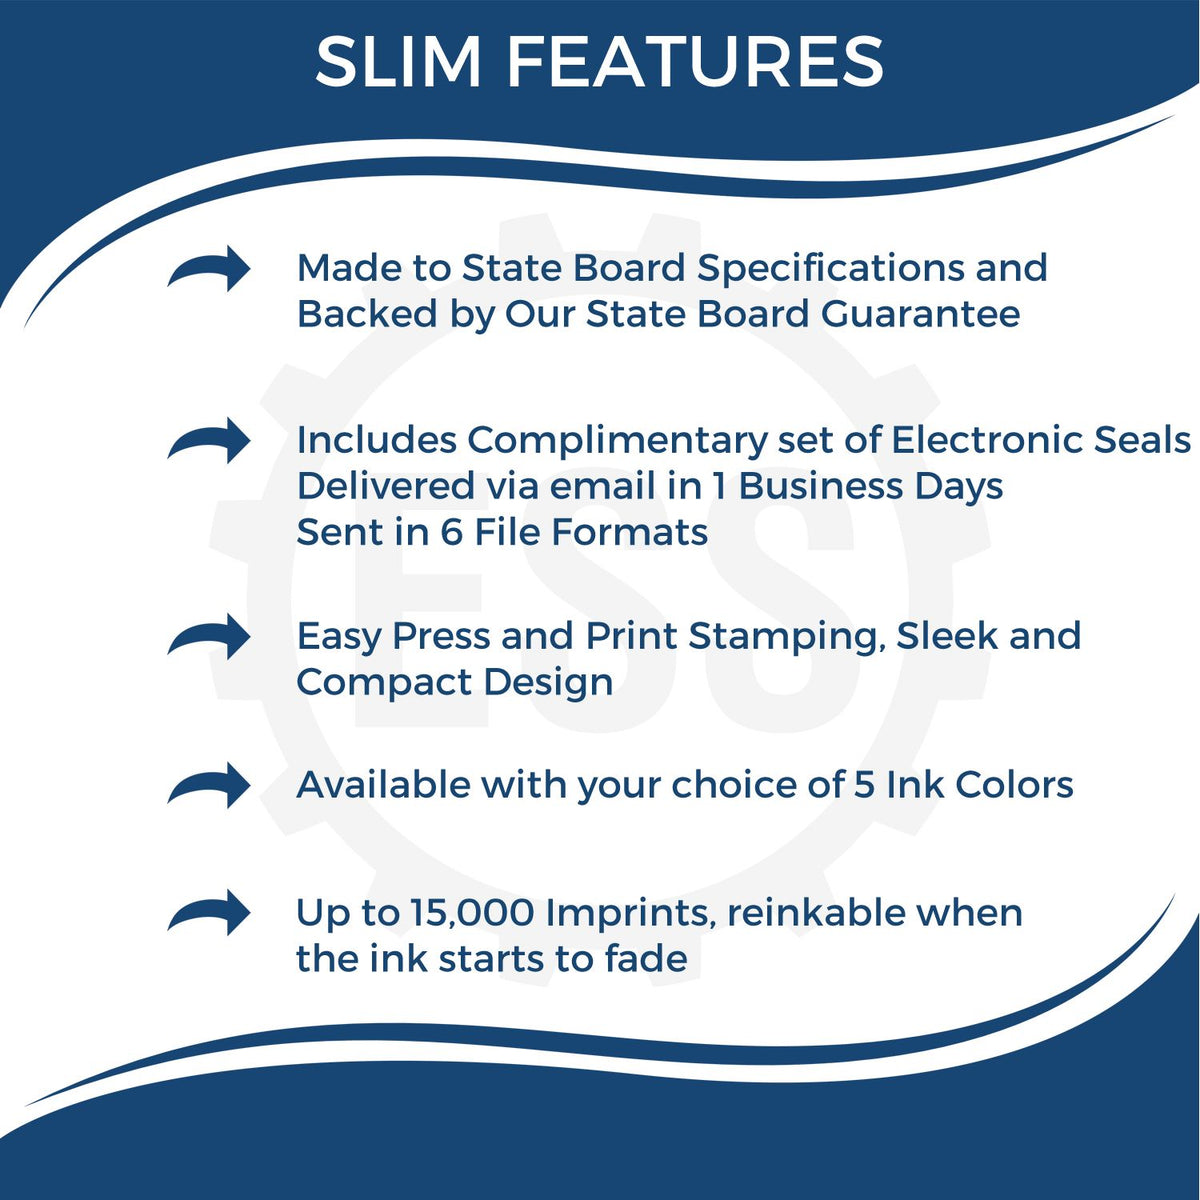 A picture of an infographic highlighting the selling points for the Super Slim Texas Notary Public Stamp